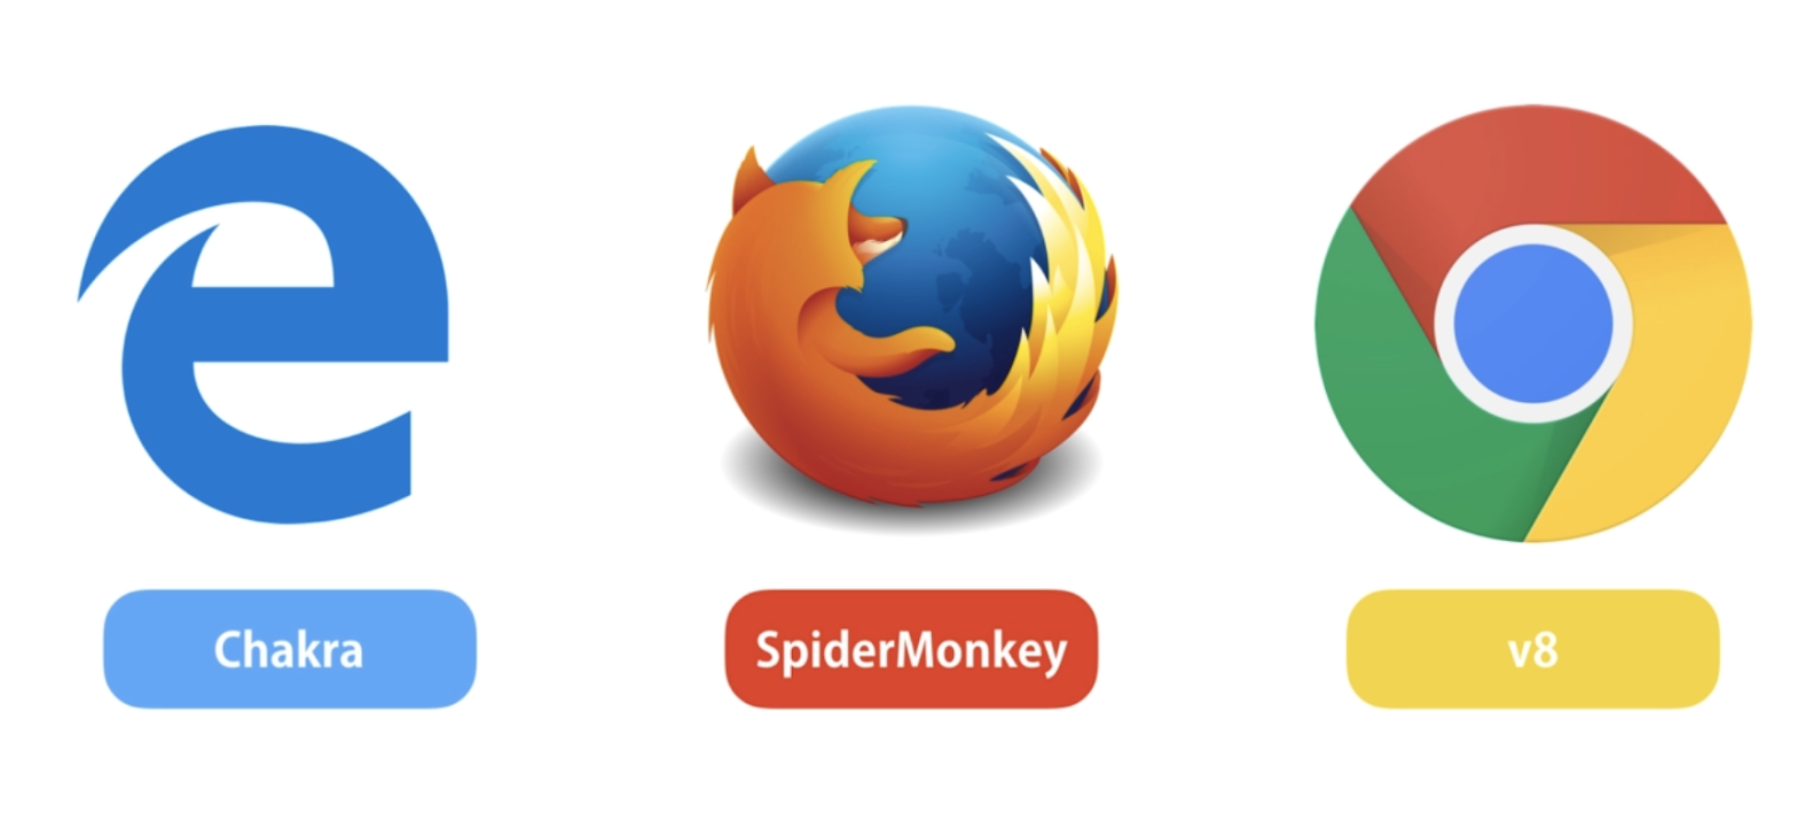 browsers are builded by Node JS